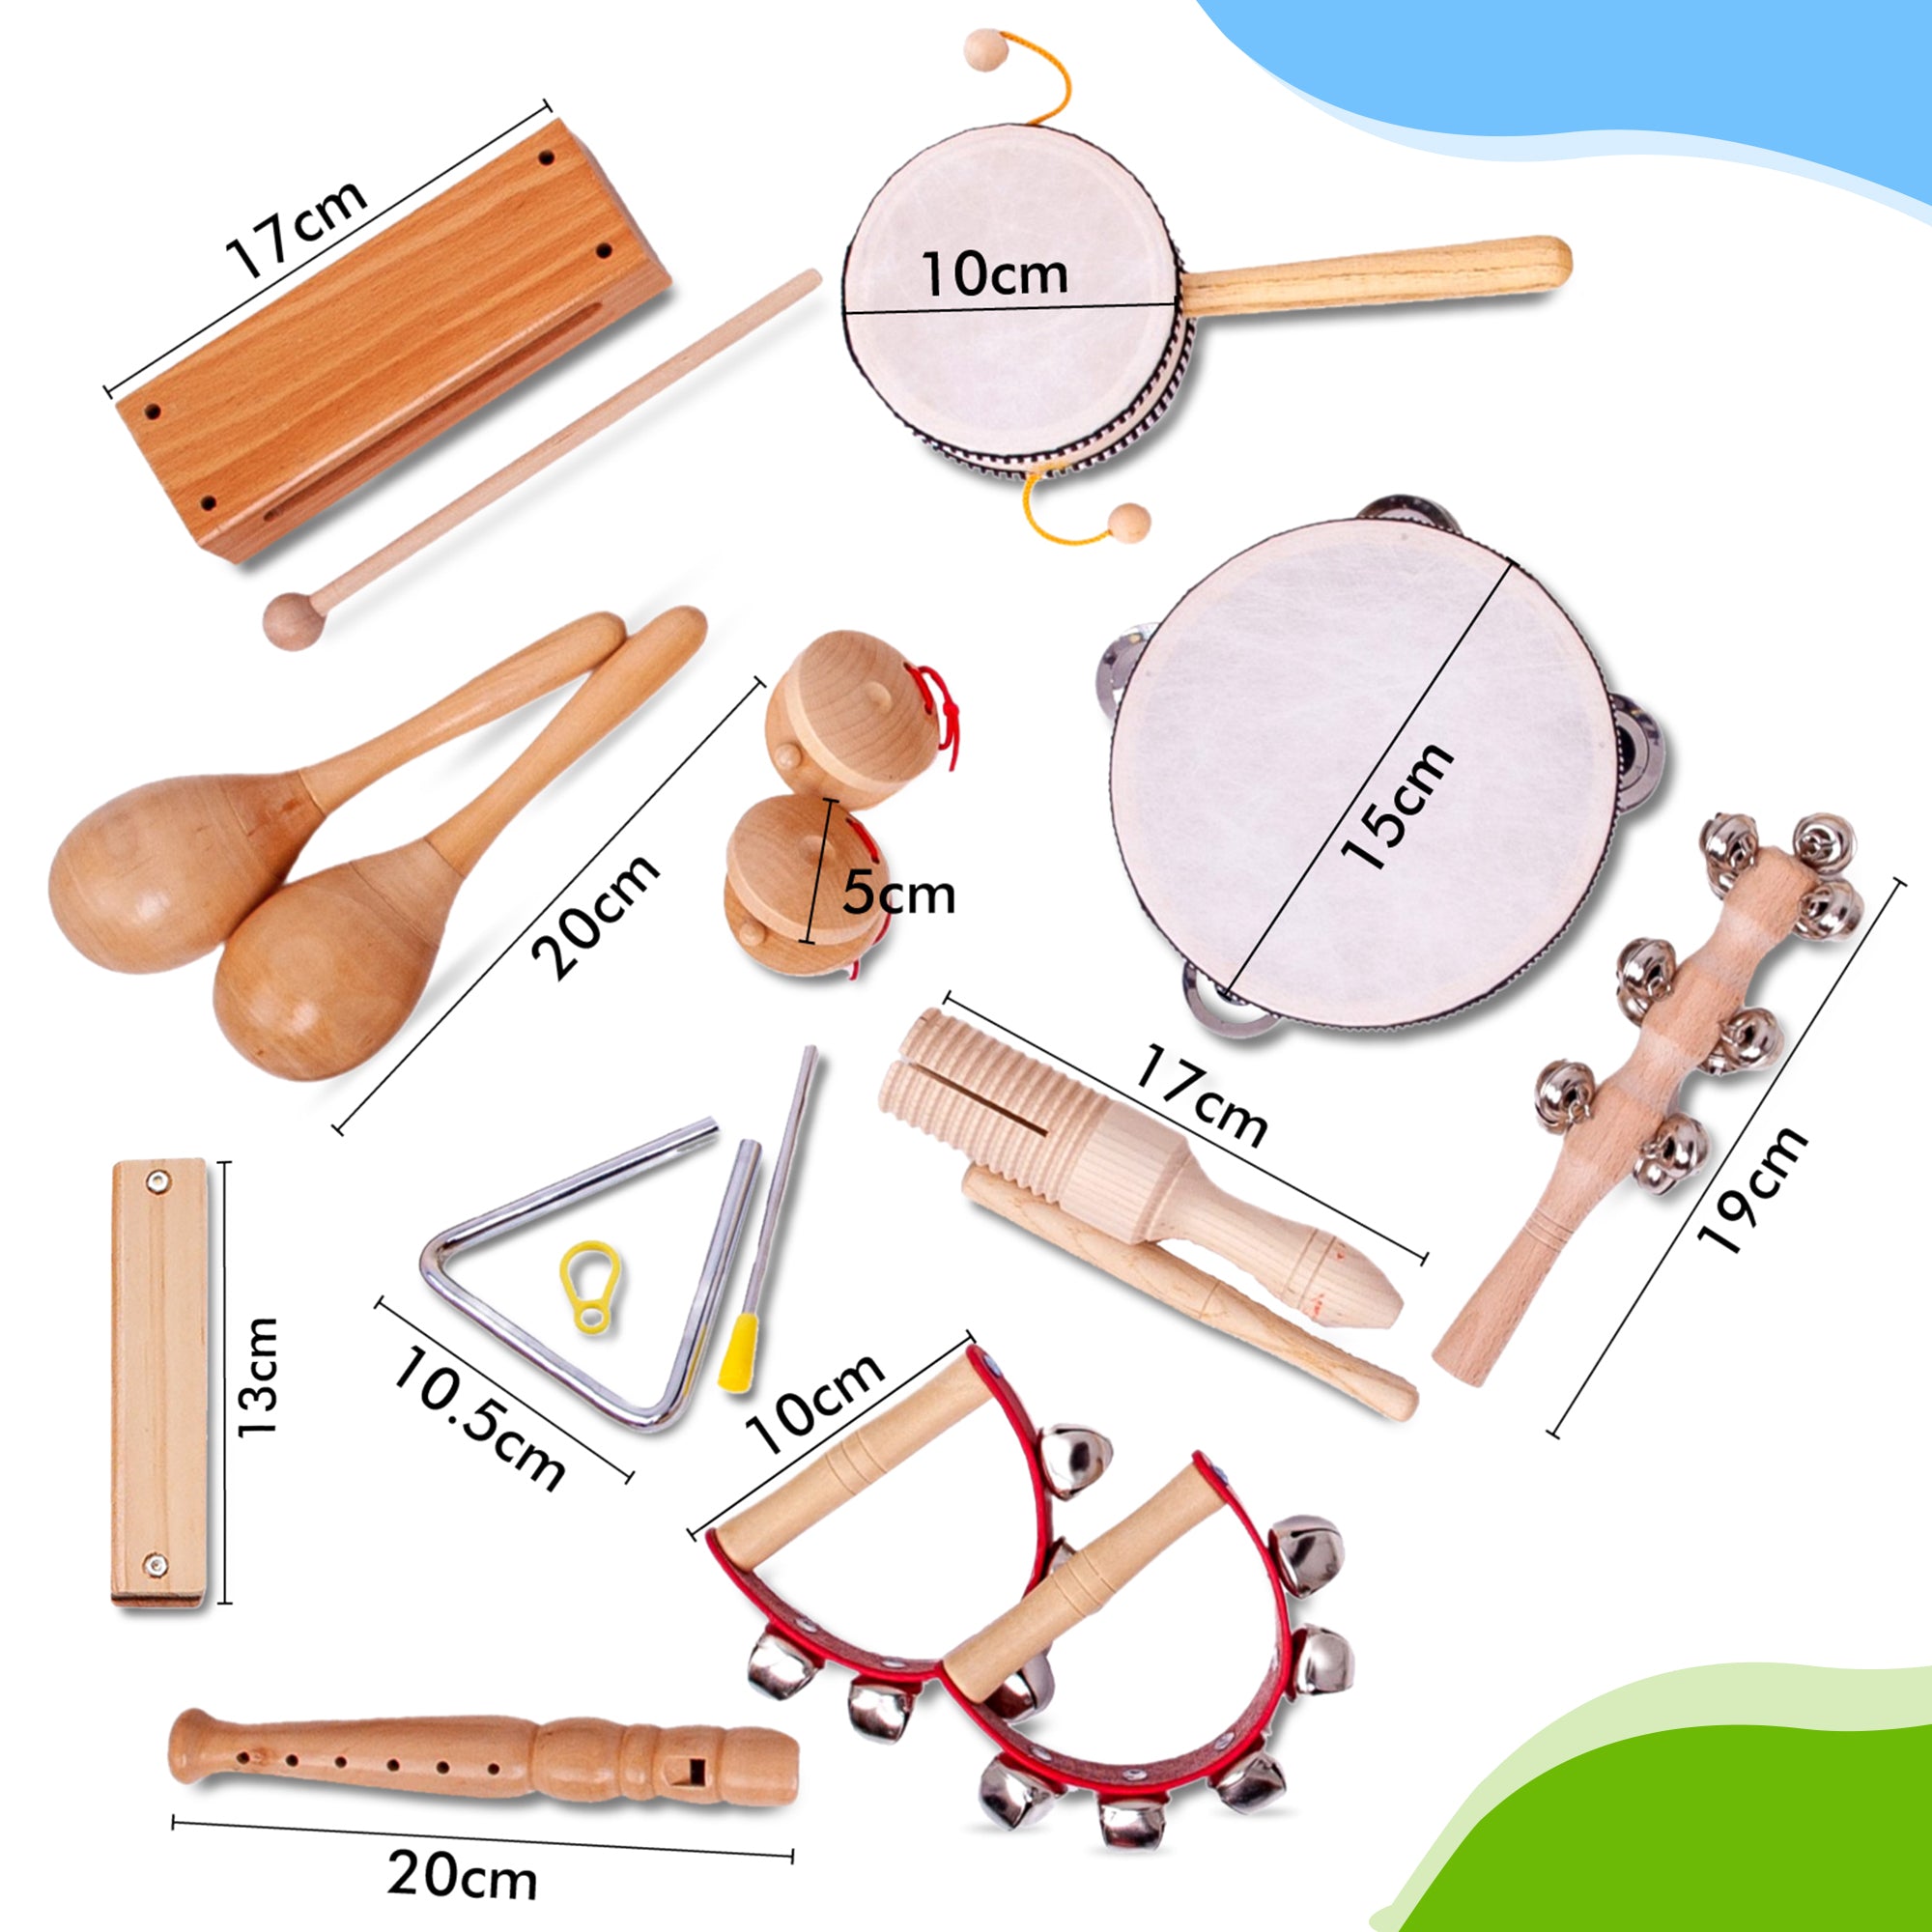 These are the dimensions of wooden toy instruments, specially made for children. Order them right away and play this wooden recorder or harmonica tomorrow. You can choose your own toy instrument